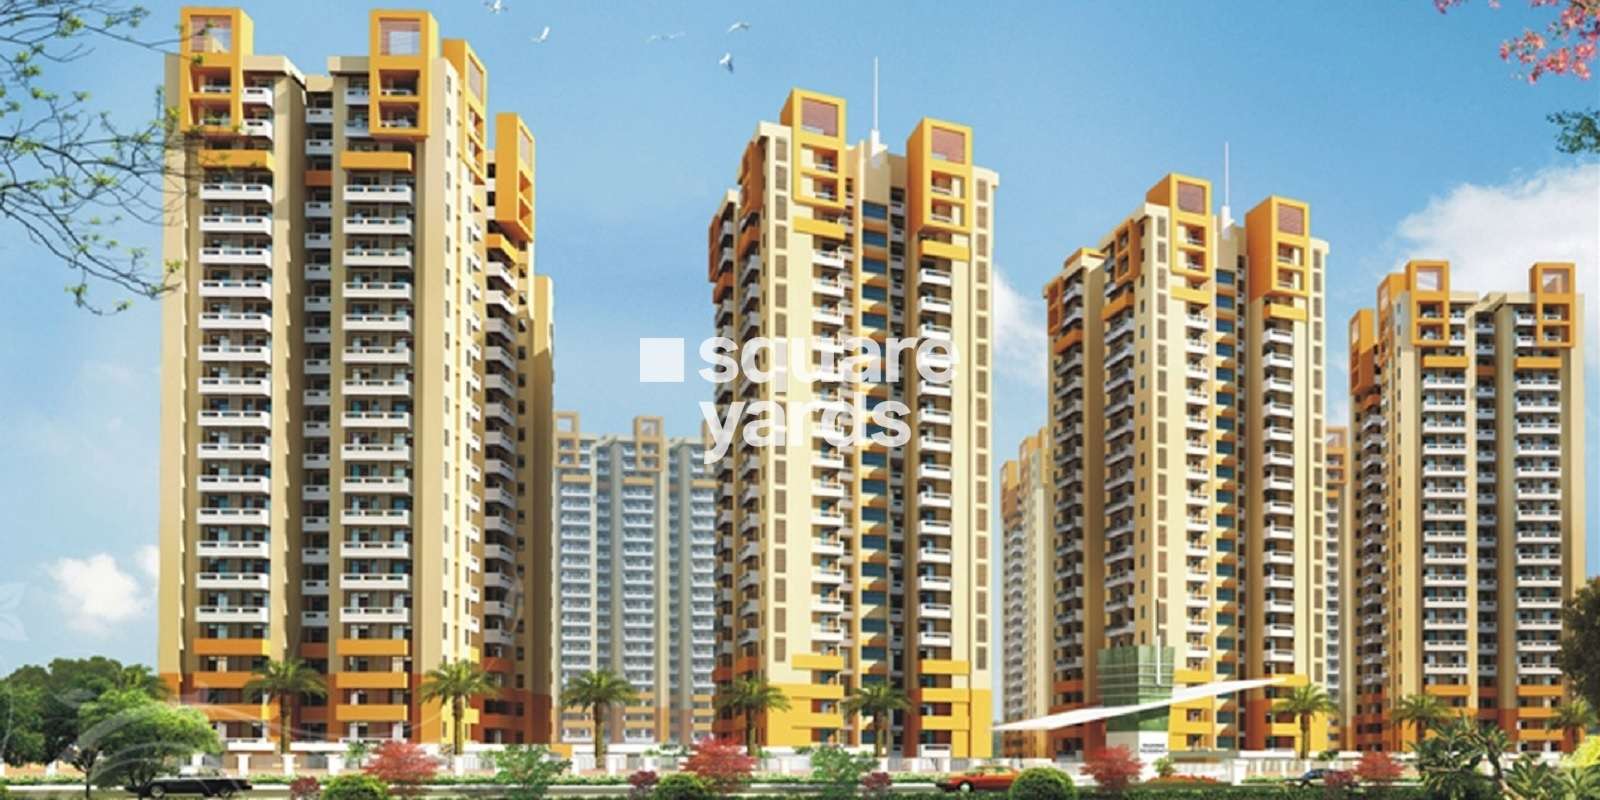 Rajhans Residency Phase 2 Cover Image